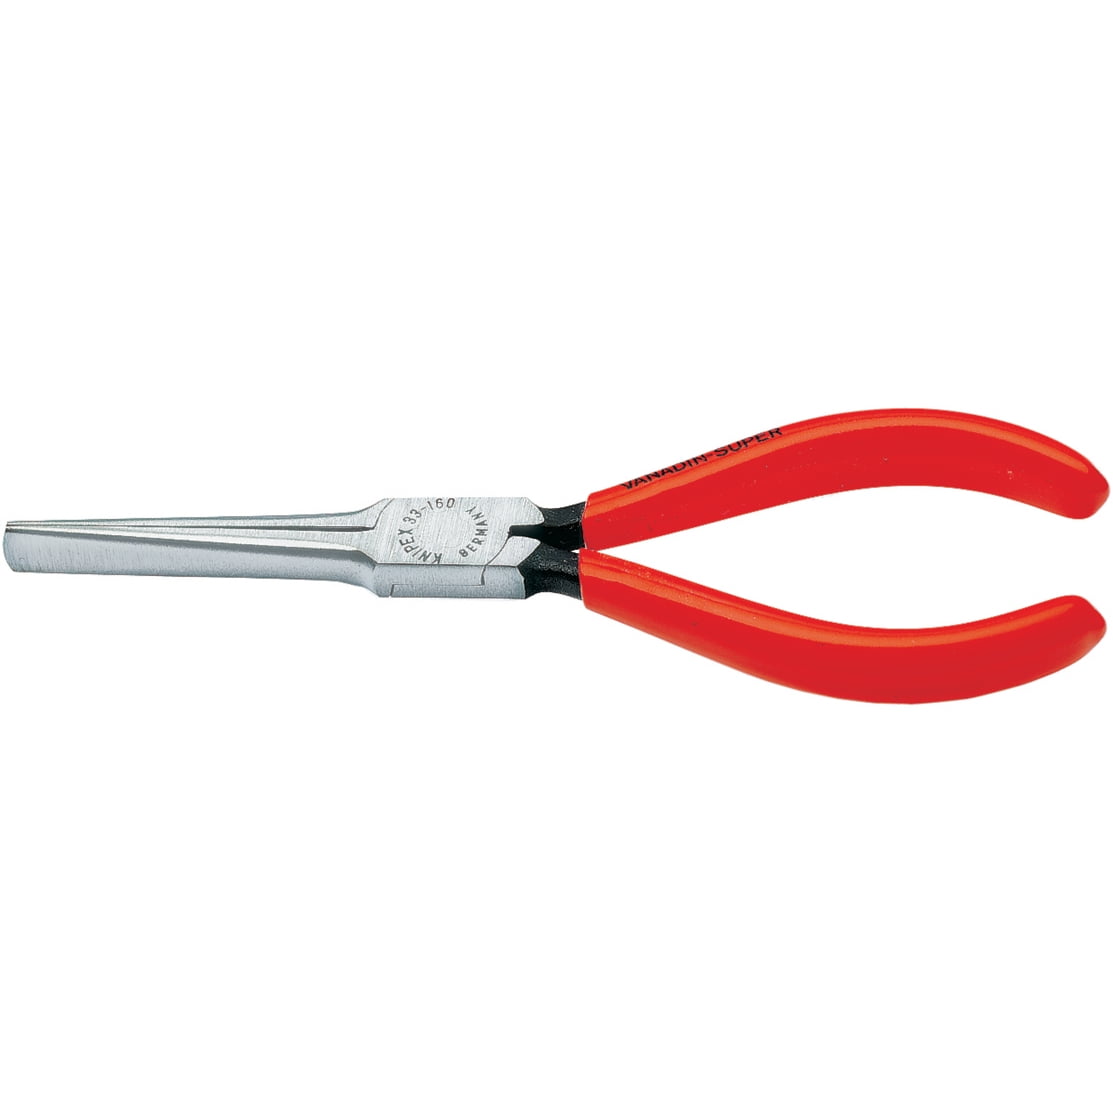 Knipex 46 11 A2 External Straight Retaining Ring Pliers 7.25-Inch 